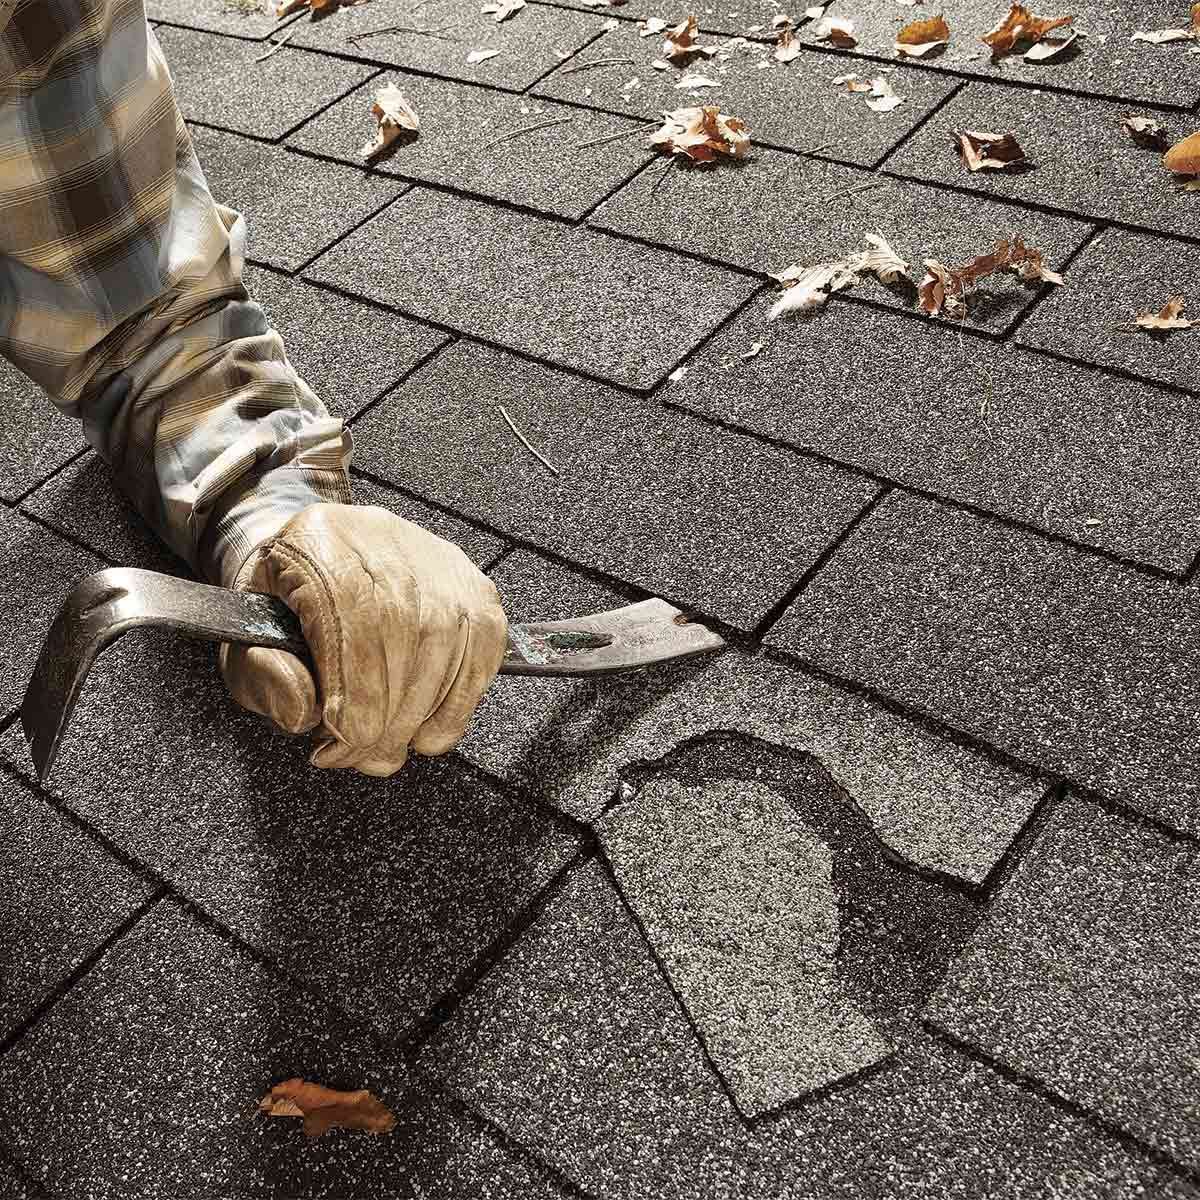 6 Signs Your Roof's Shingles Are Failing